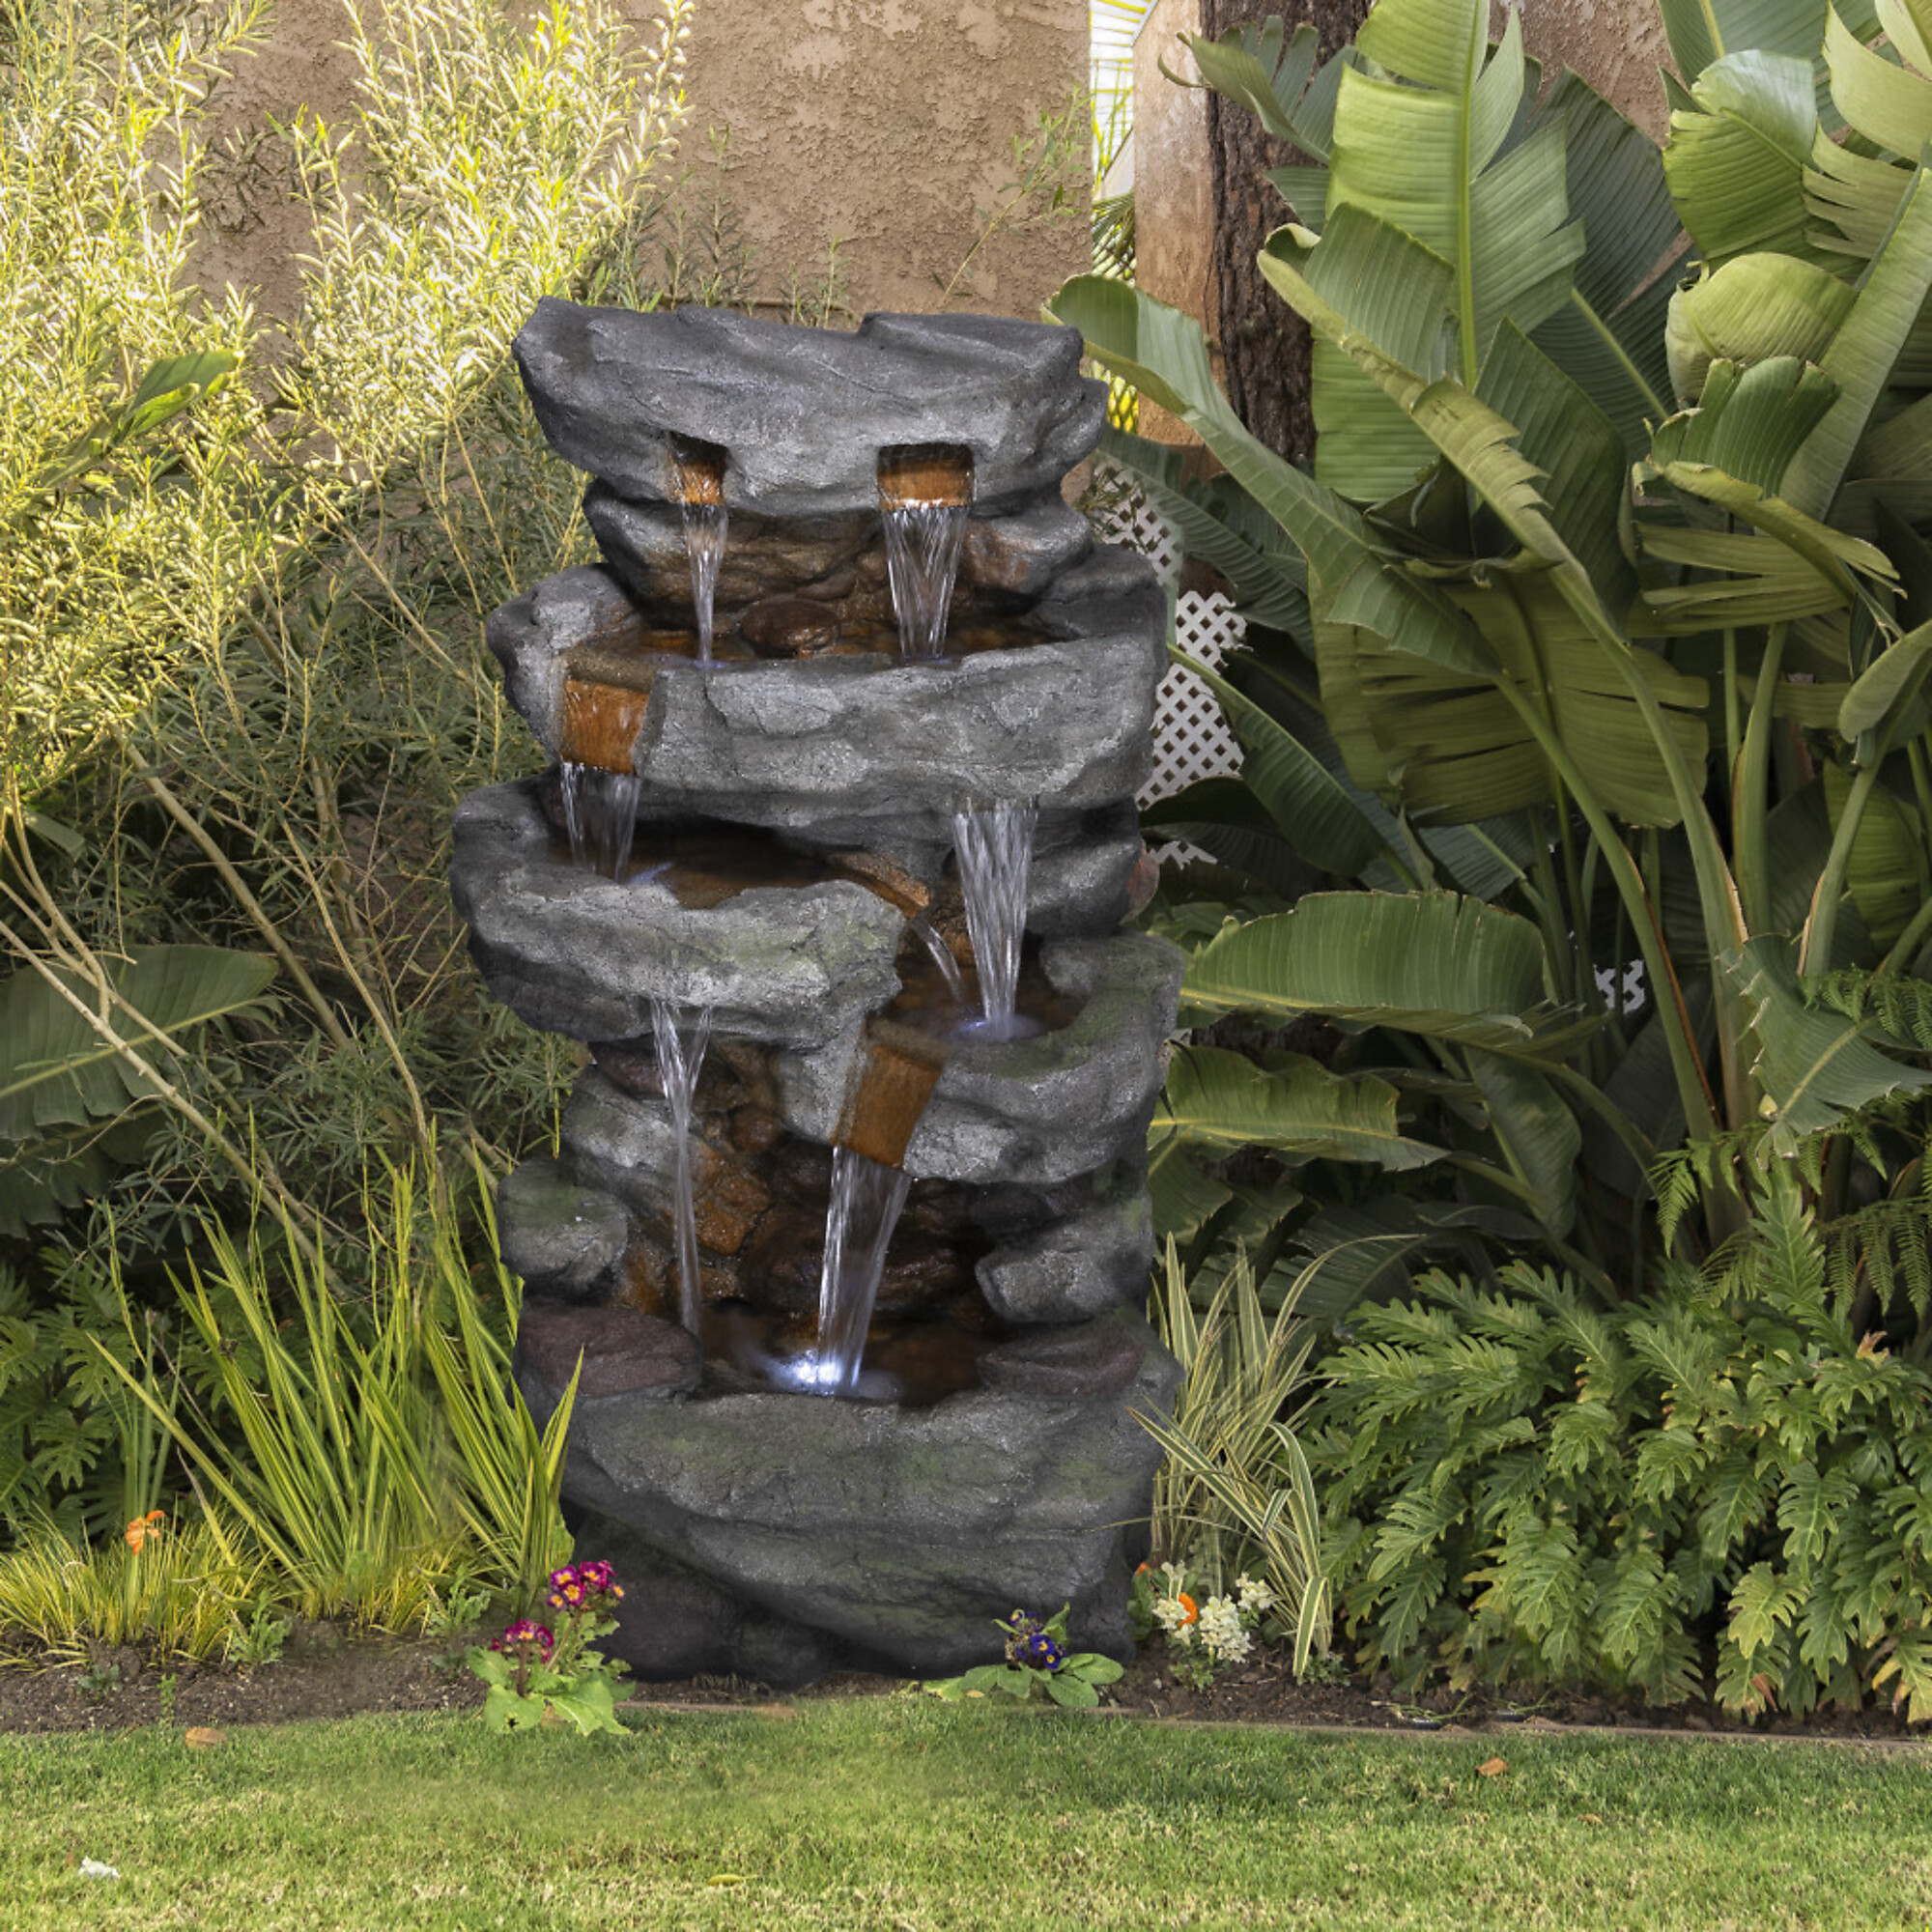 Alpine Corporation, Tiered Stone Stream Fountain, Volts 120, Power Cord Length 6 ft, Model TZL284